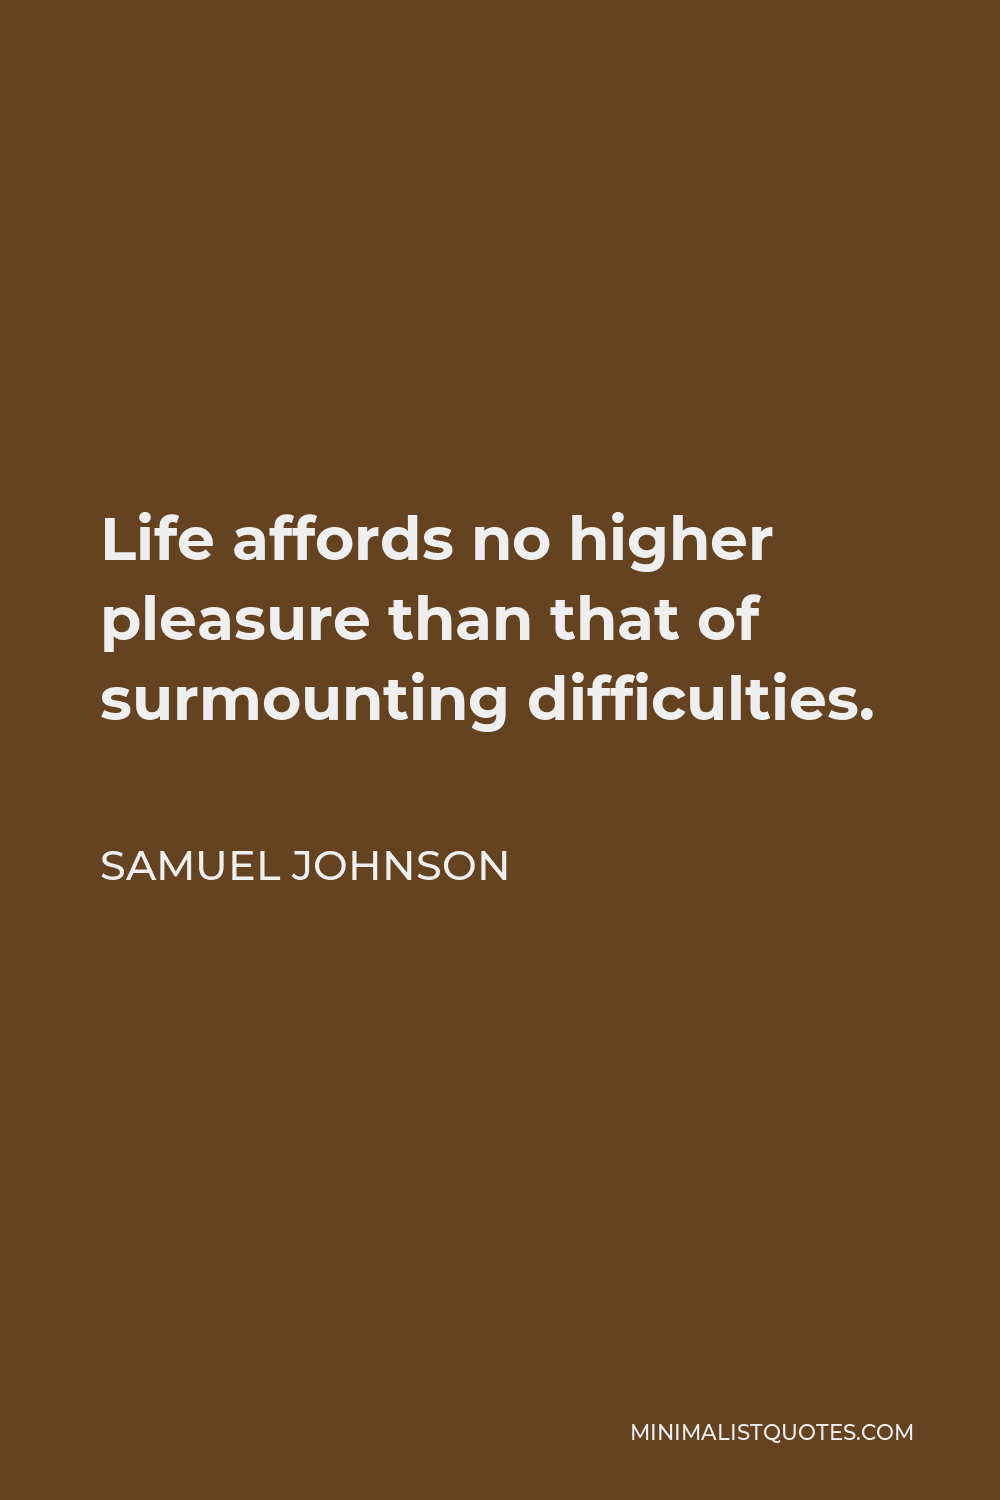 Samuel Johnson Quote - Life affords no higher pleasure than that of surmounting difficulties, passing from one step of success to another, forming new wishes and seeing them gratified.